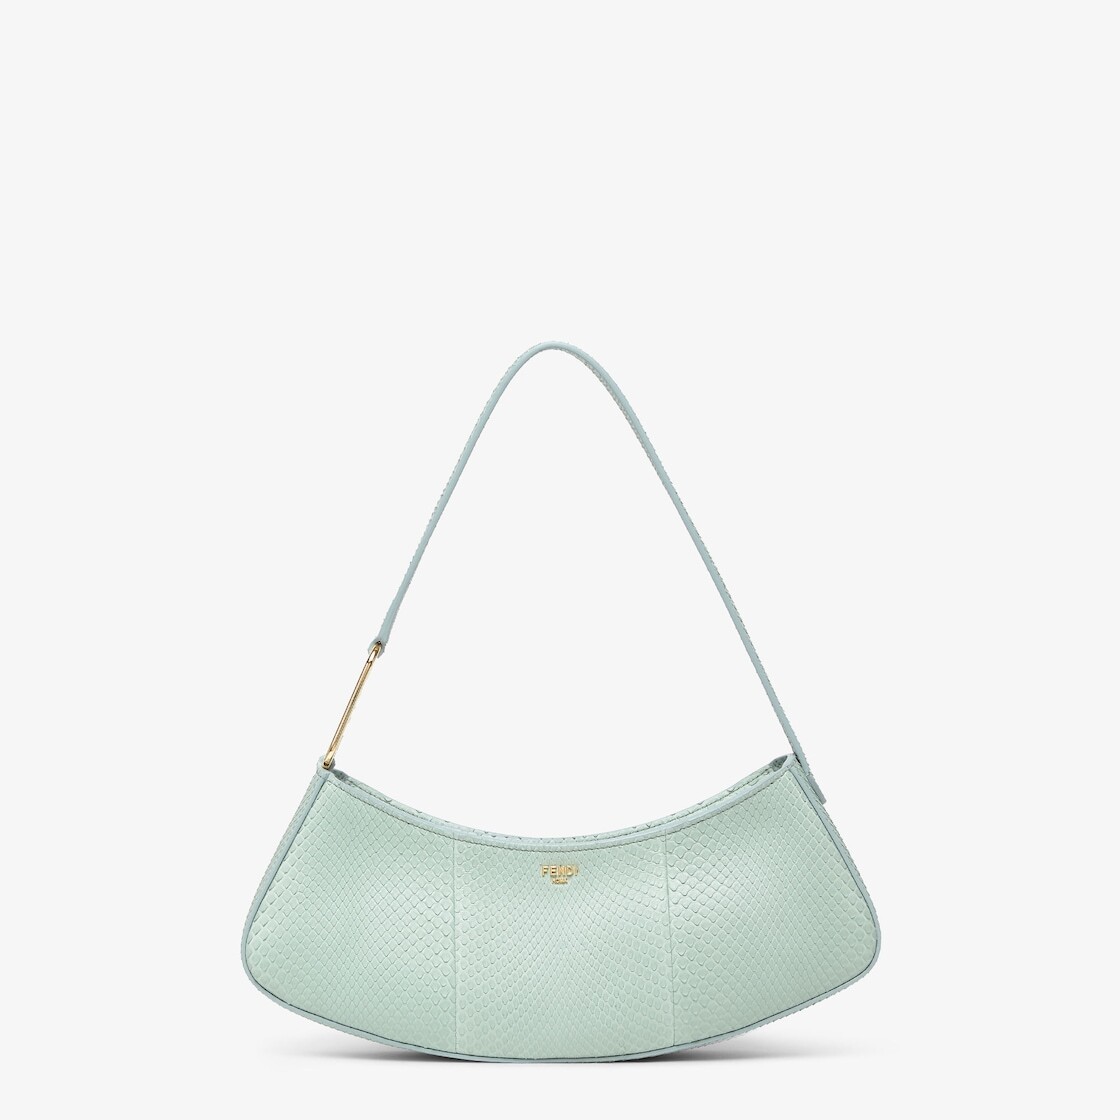 Mint green python leather pouch